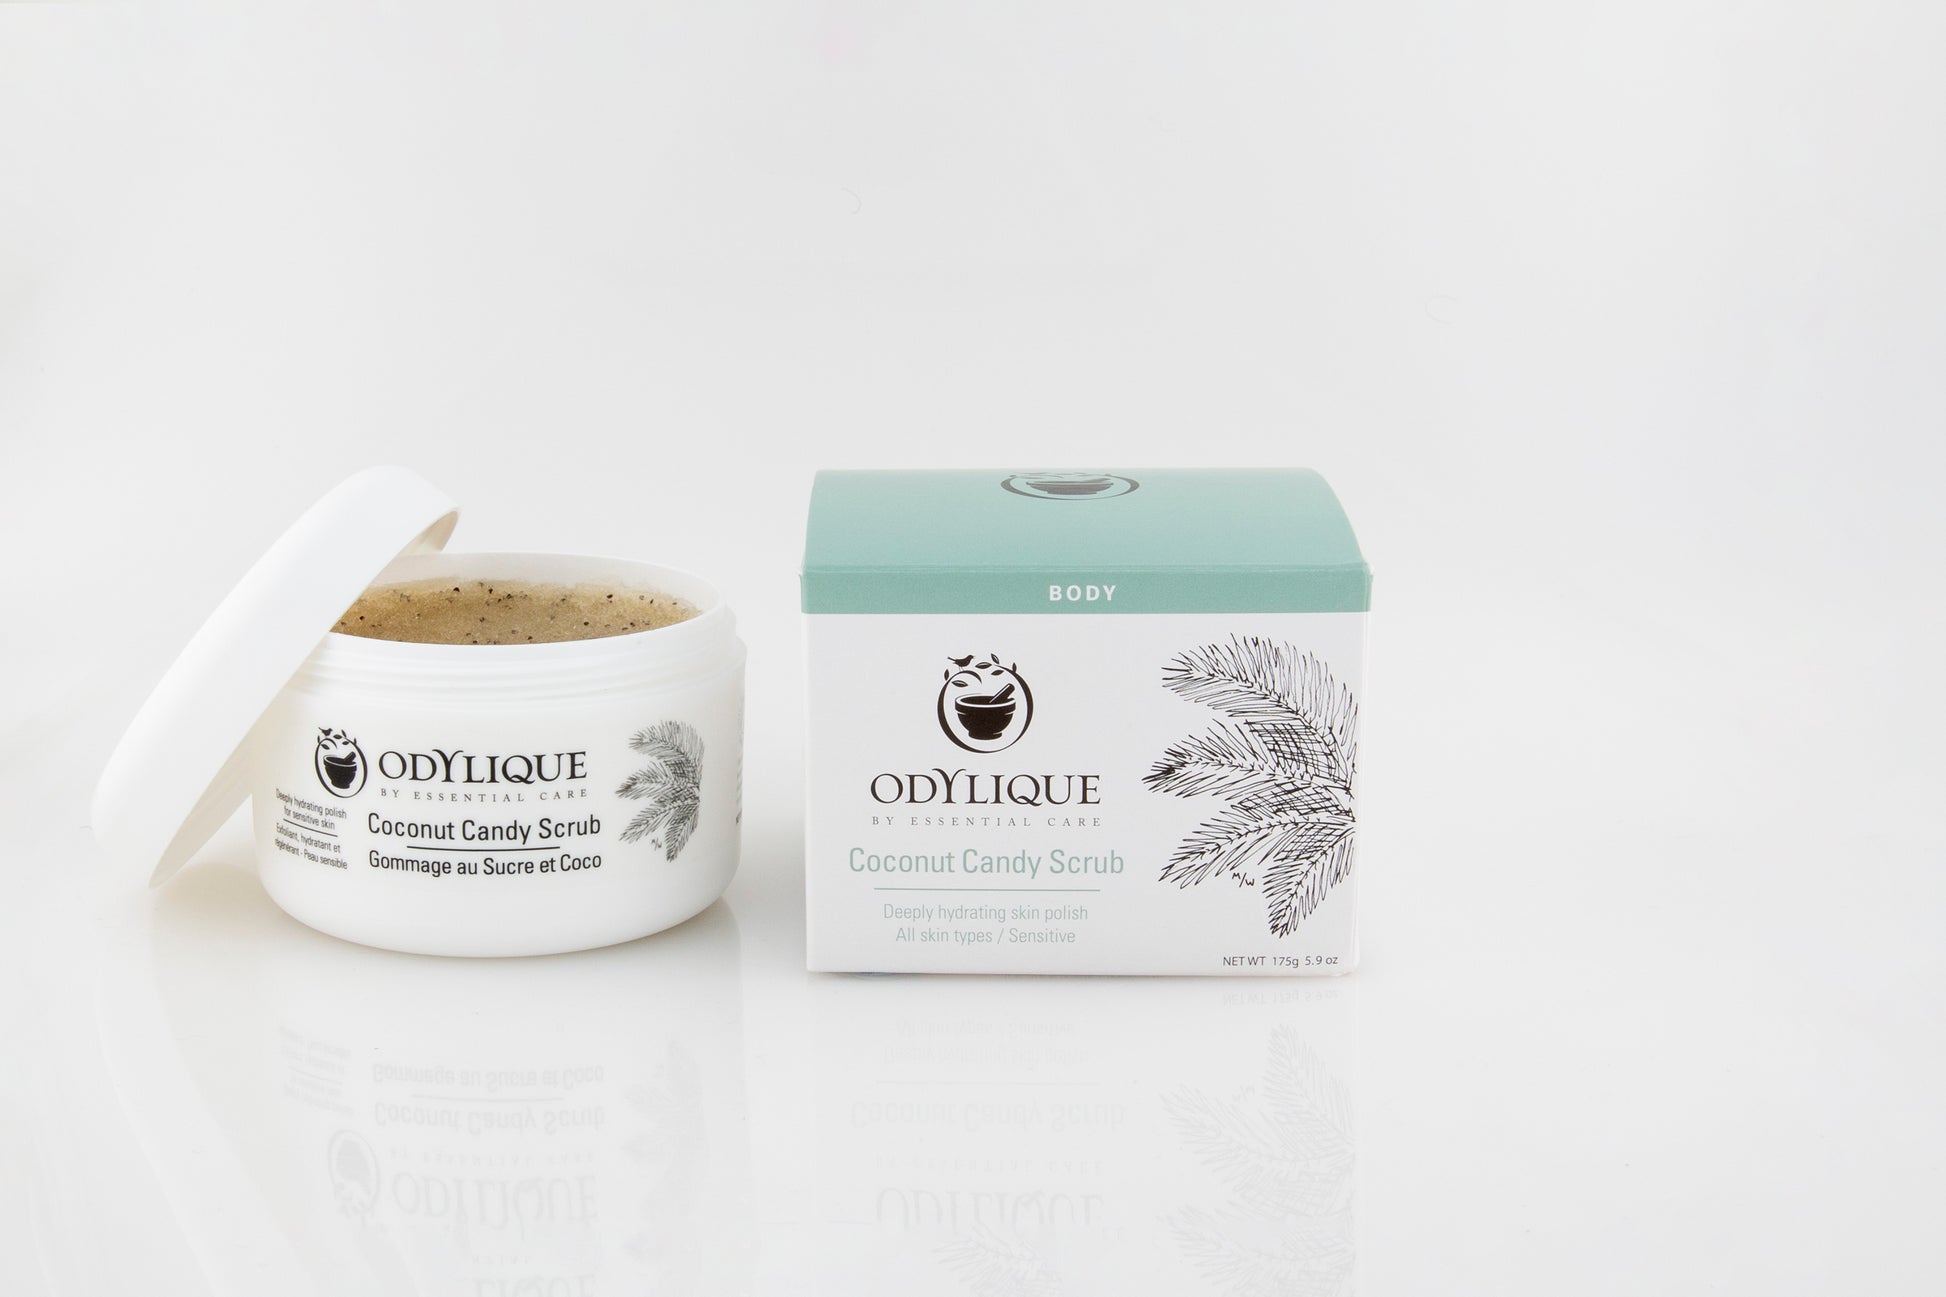 Odylique Coconut Candy Scrub. Open jar from the front with box next to it. Organic skincare